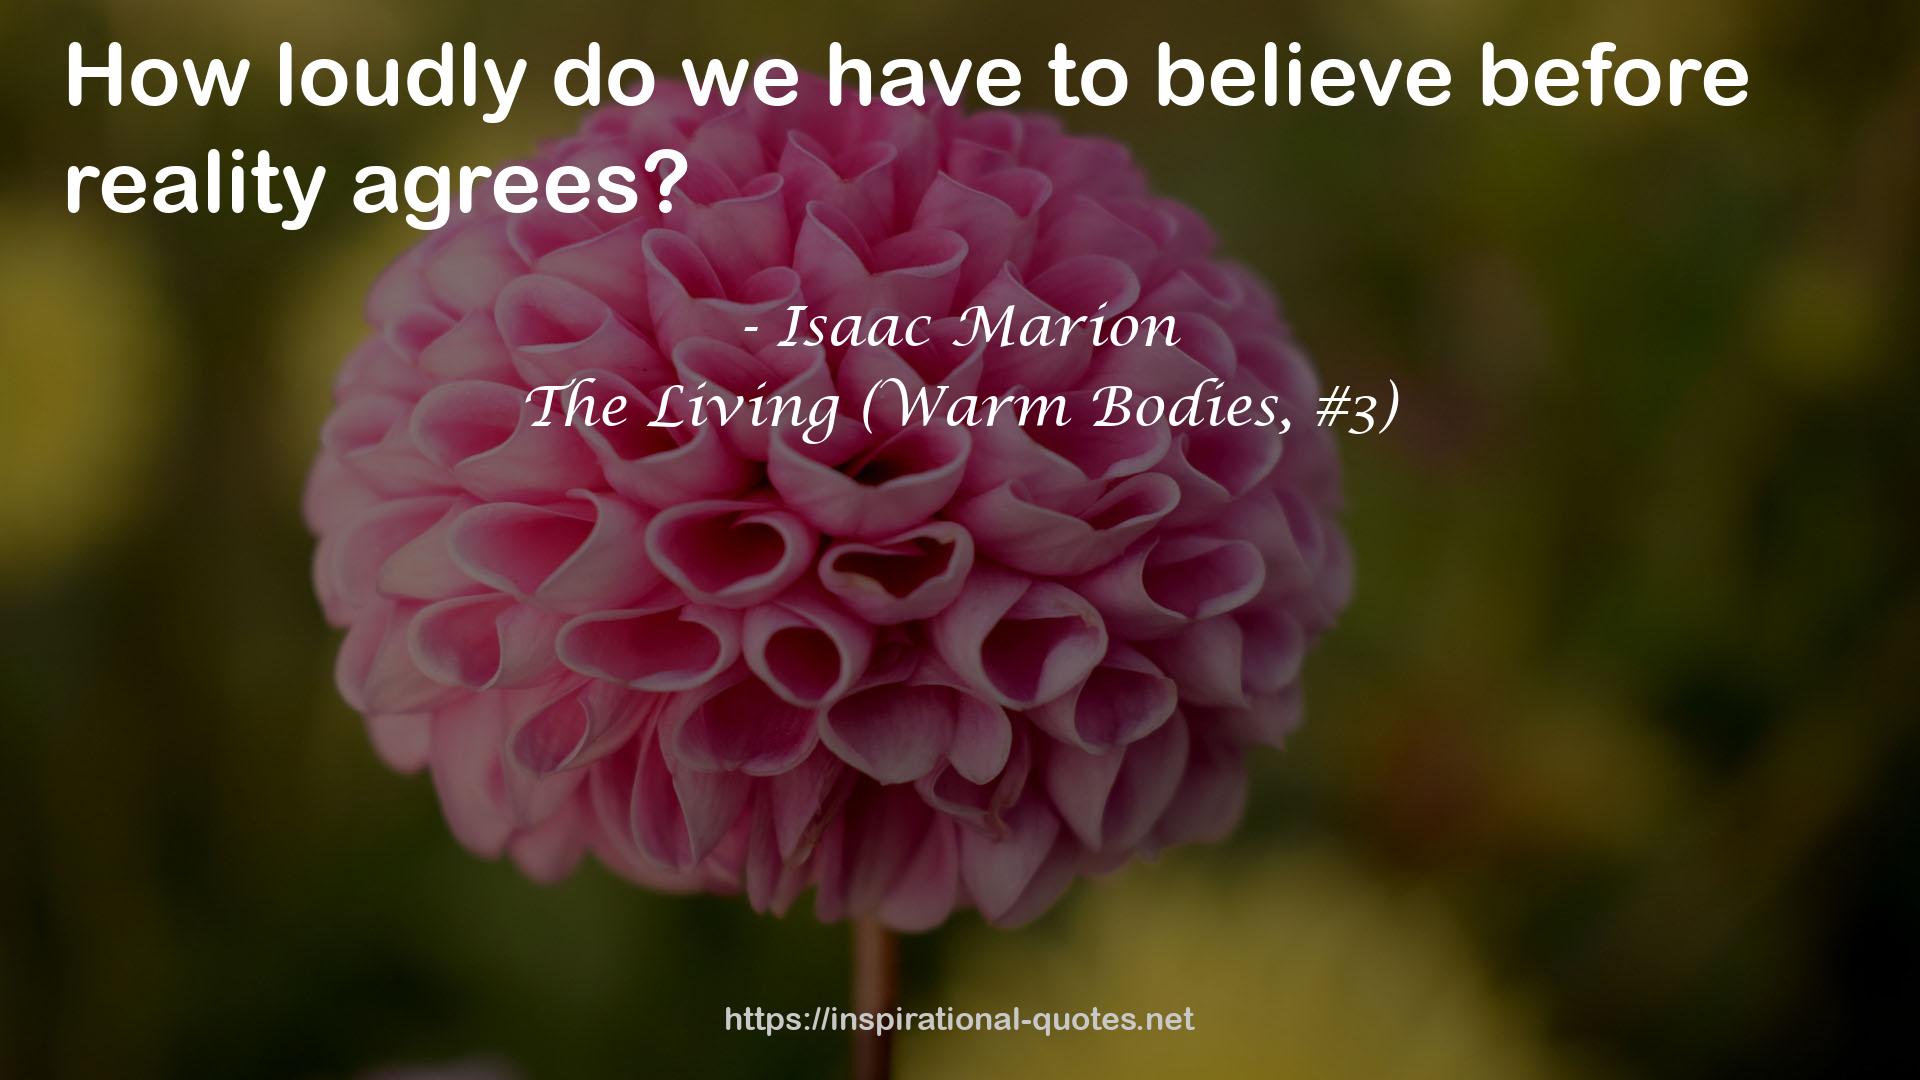 The Living (Warm Bodies, #3) QUOTES